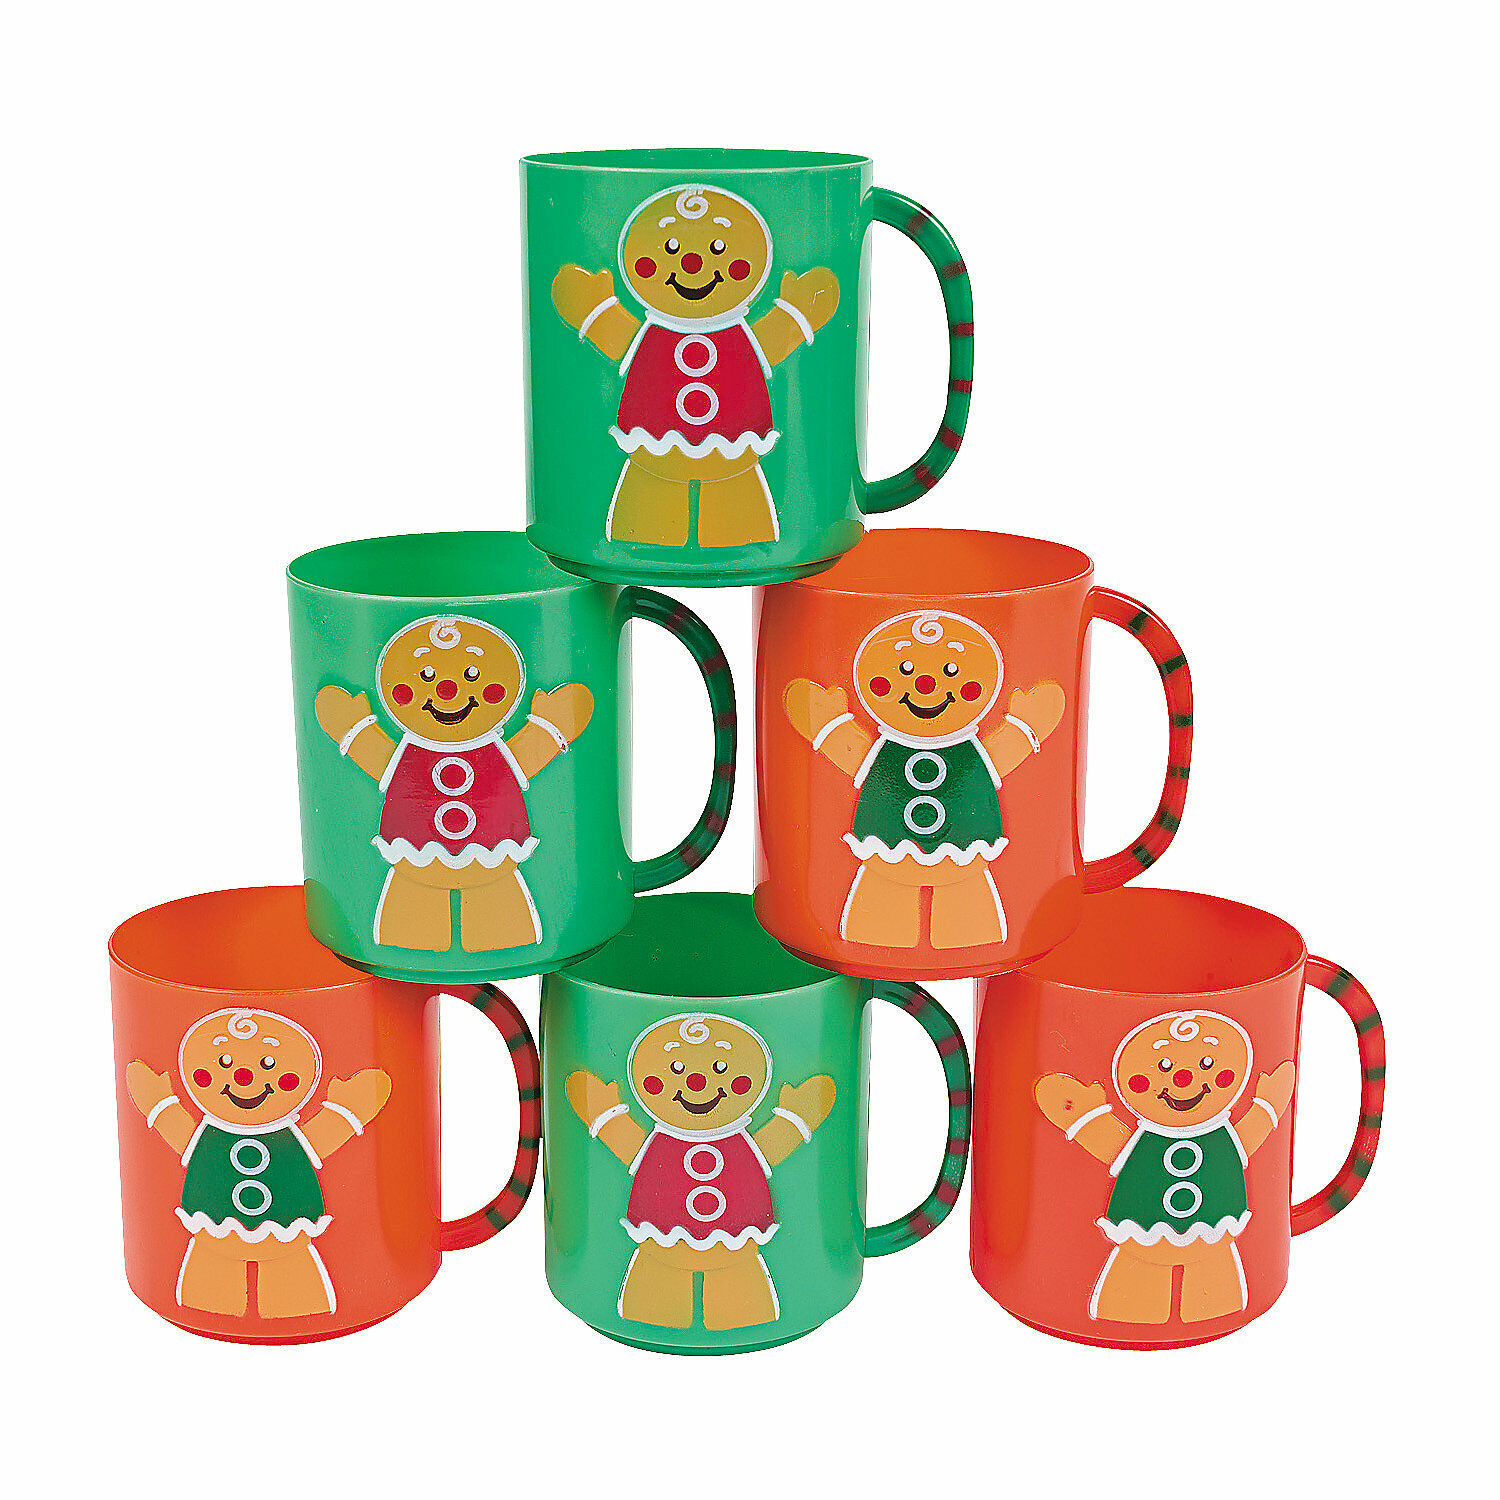 Holiday Gingerbread Man Plastic Mugs, Party Supplies, 12 Pieces